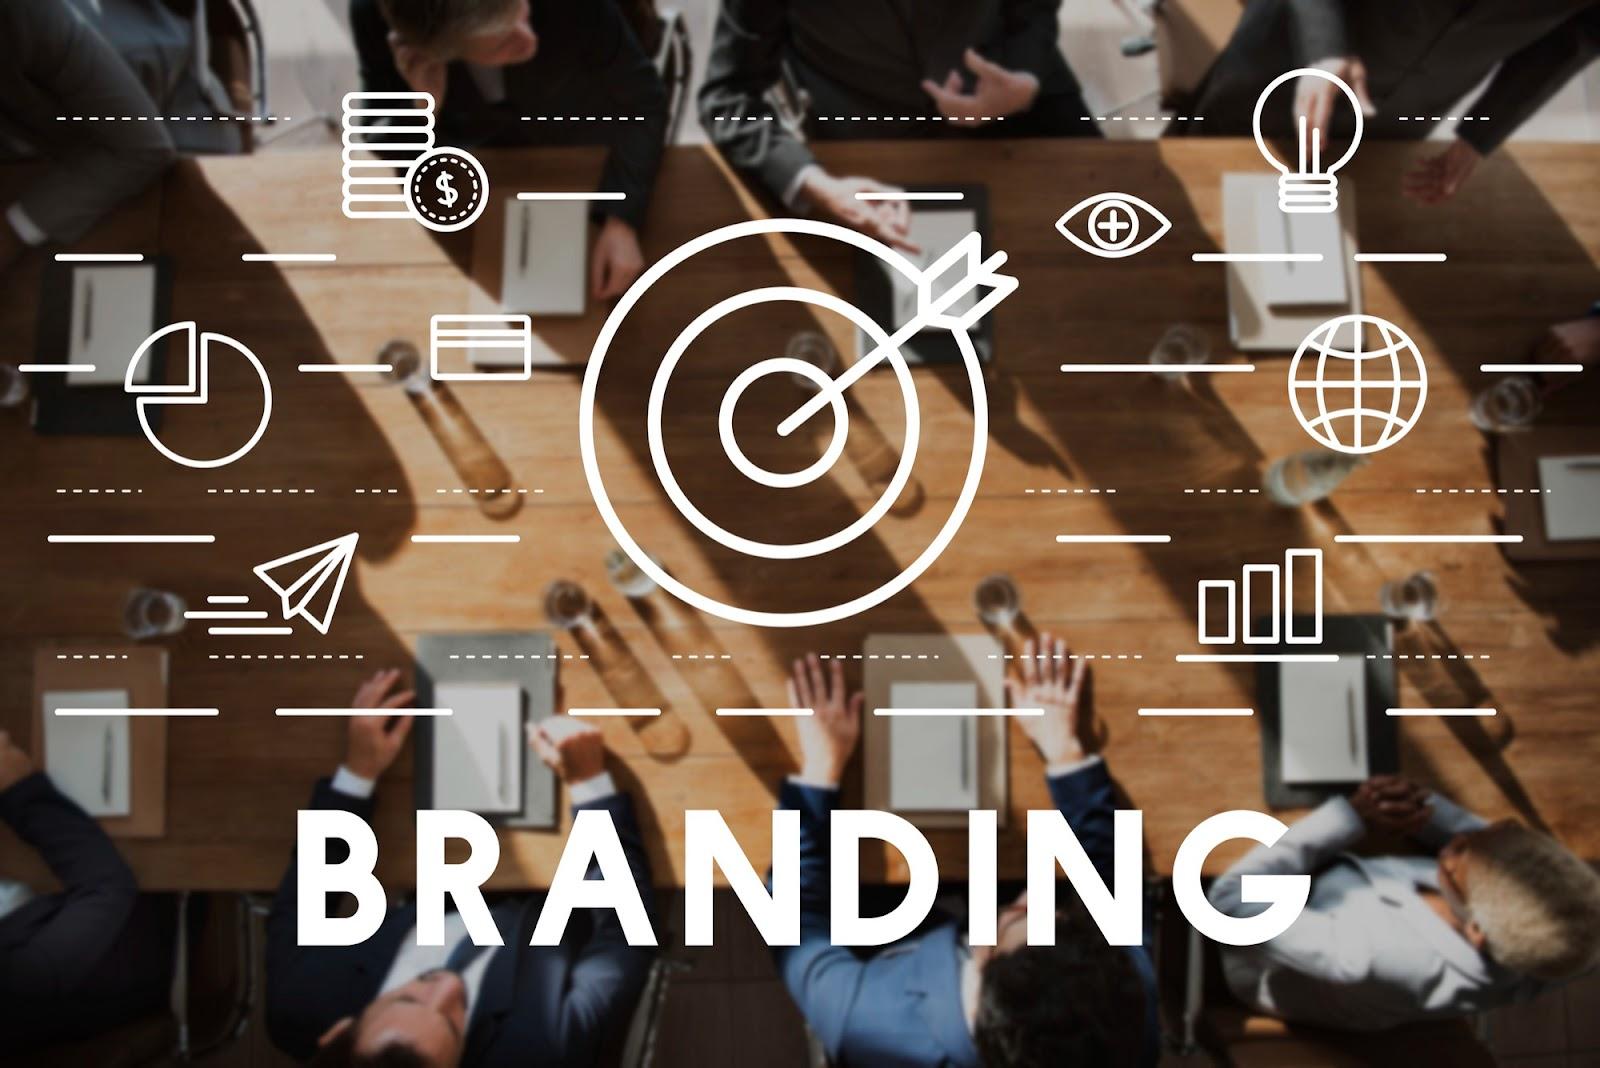 The significance of branding